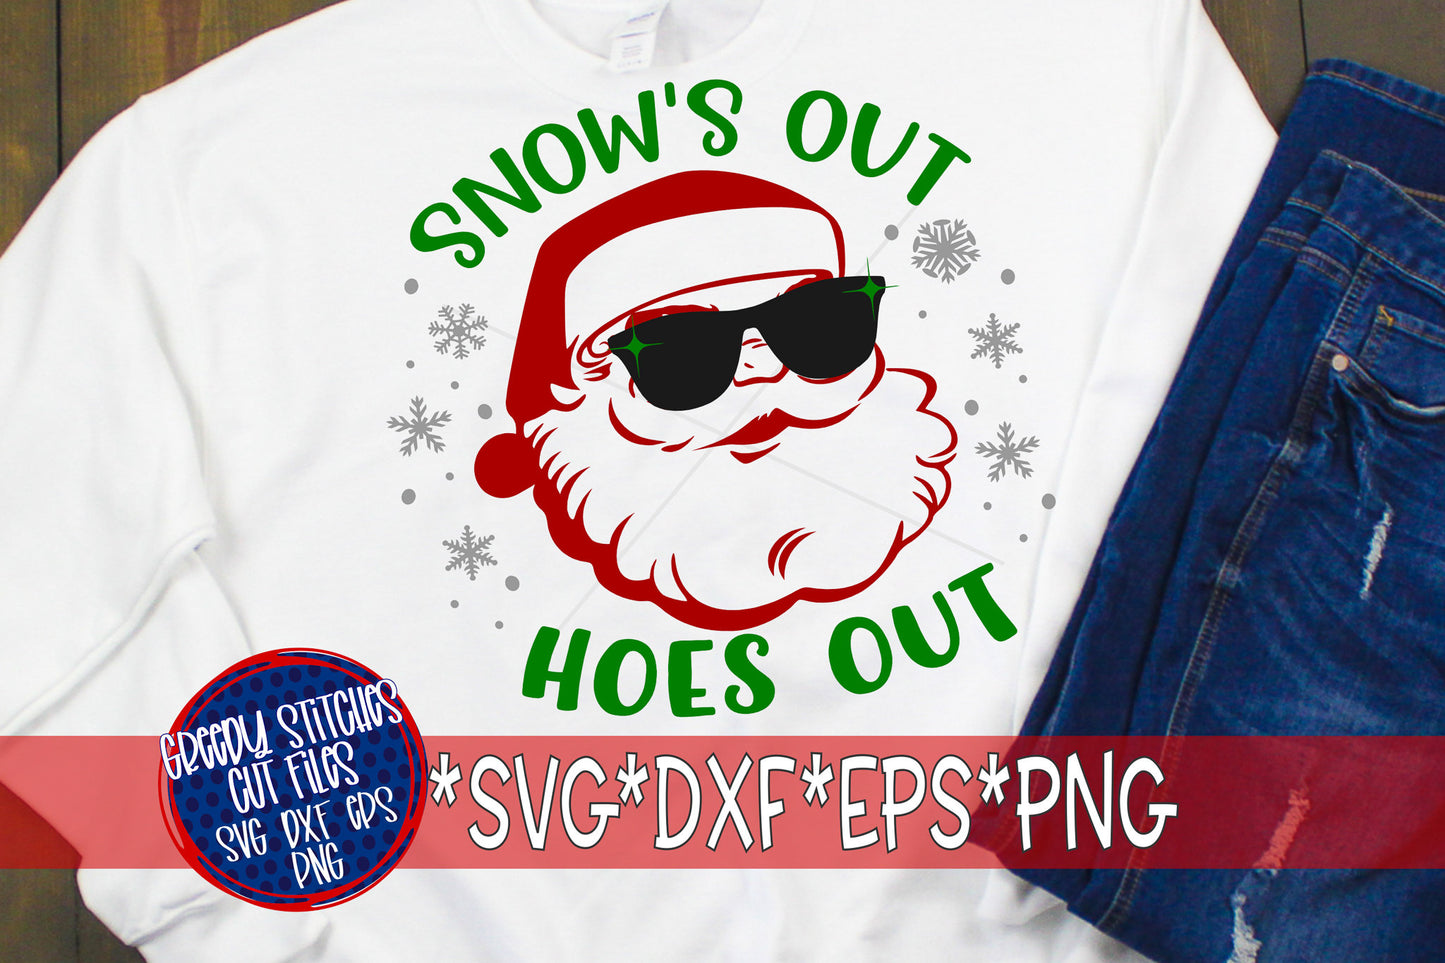 Snow&#39;s Out Ho&#39;s Out svg, dxf, eps, png. Christmas SvG | Santa Claus SvG | Santa DxF | Snows Out Hos Out SvG | Instant Download Cut File